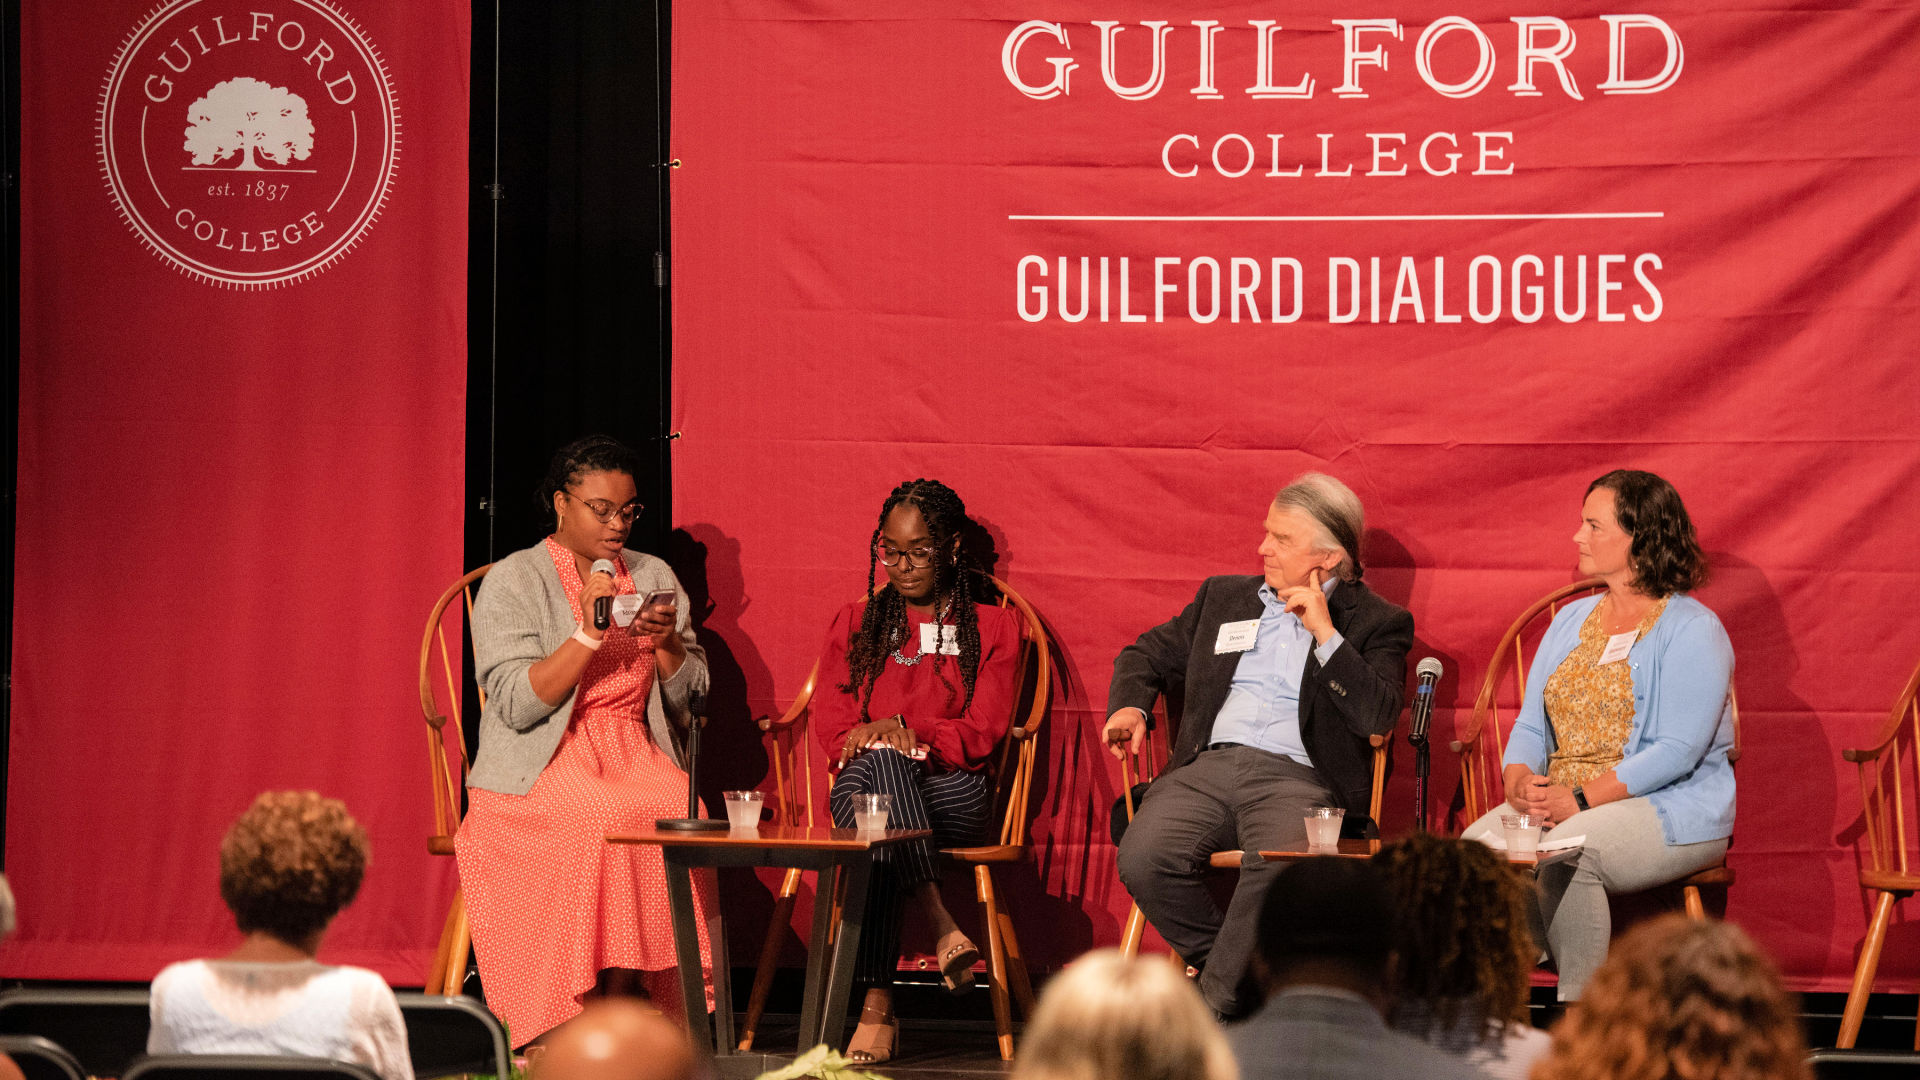 Seated on stage at the Guilford Dialogues are, from left: Adriane Clomax, Roodline Volcy, Dennis Quaintance, and Guenevere Abernathy.